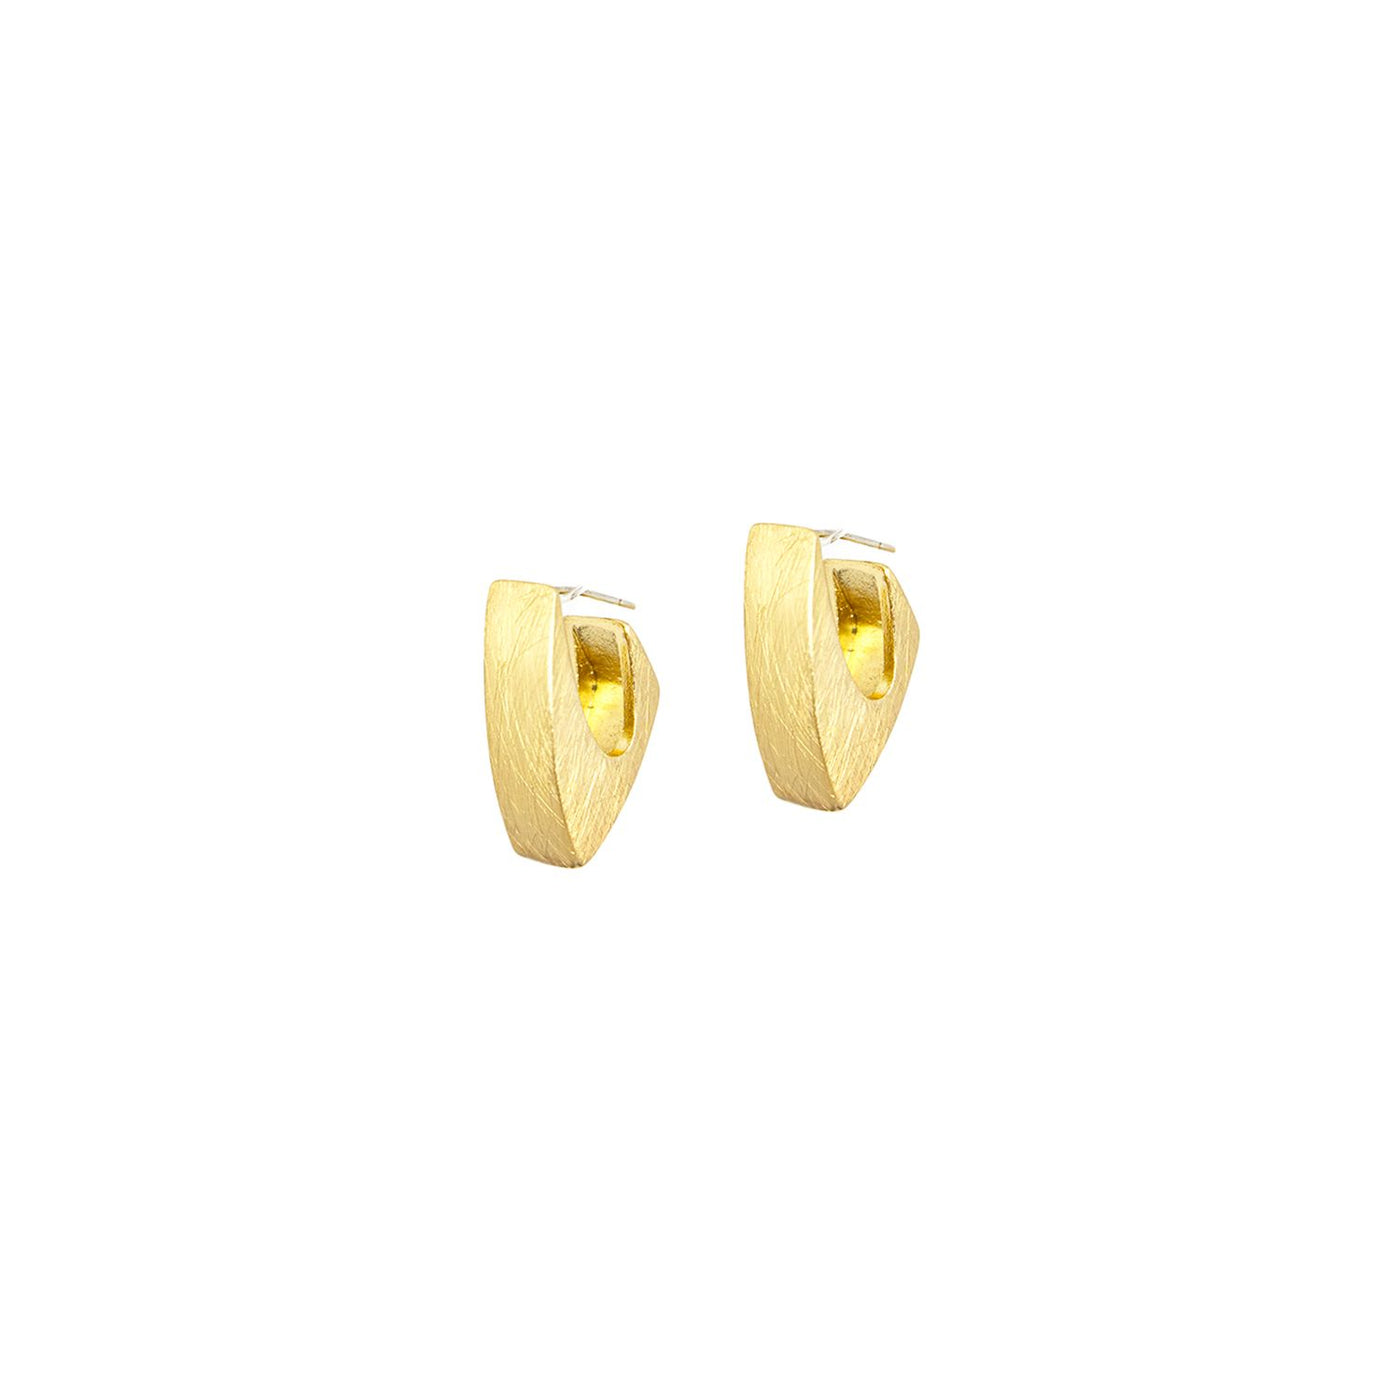 Angular Post Earring in Gold - Madison's Niche 